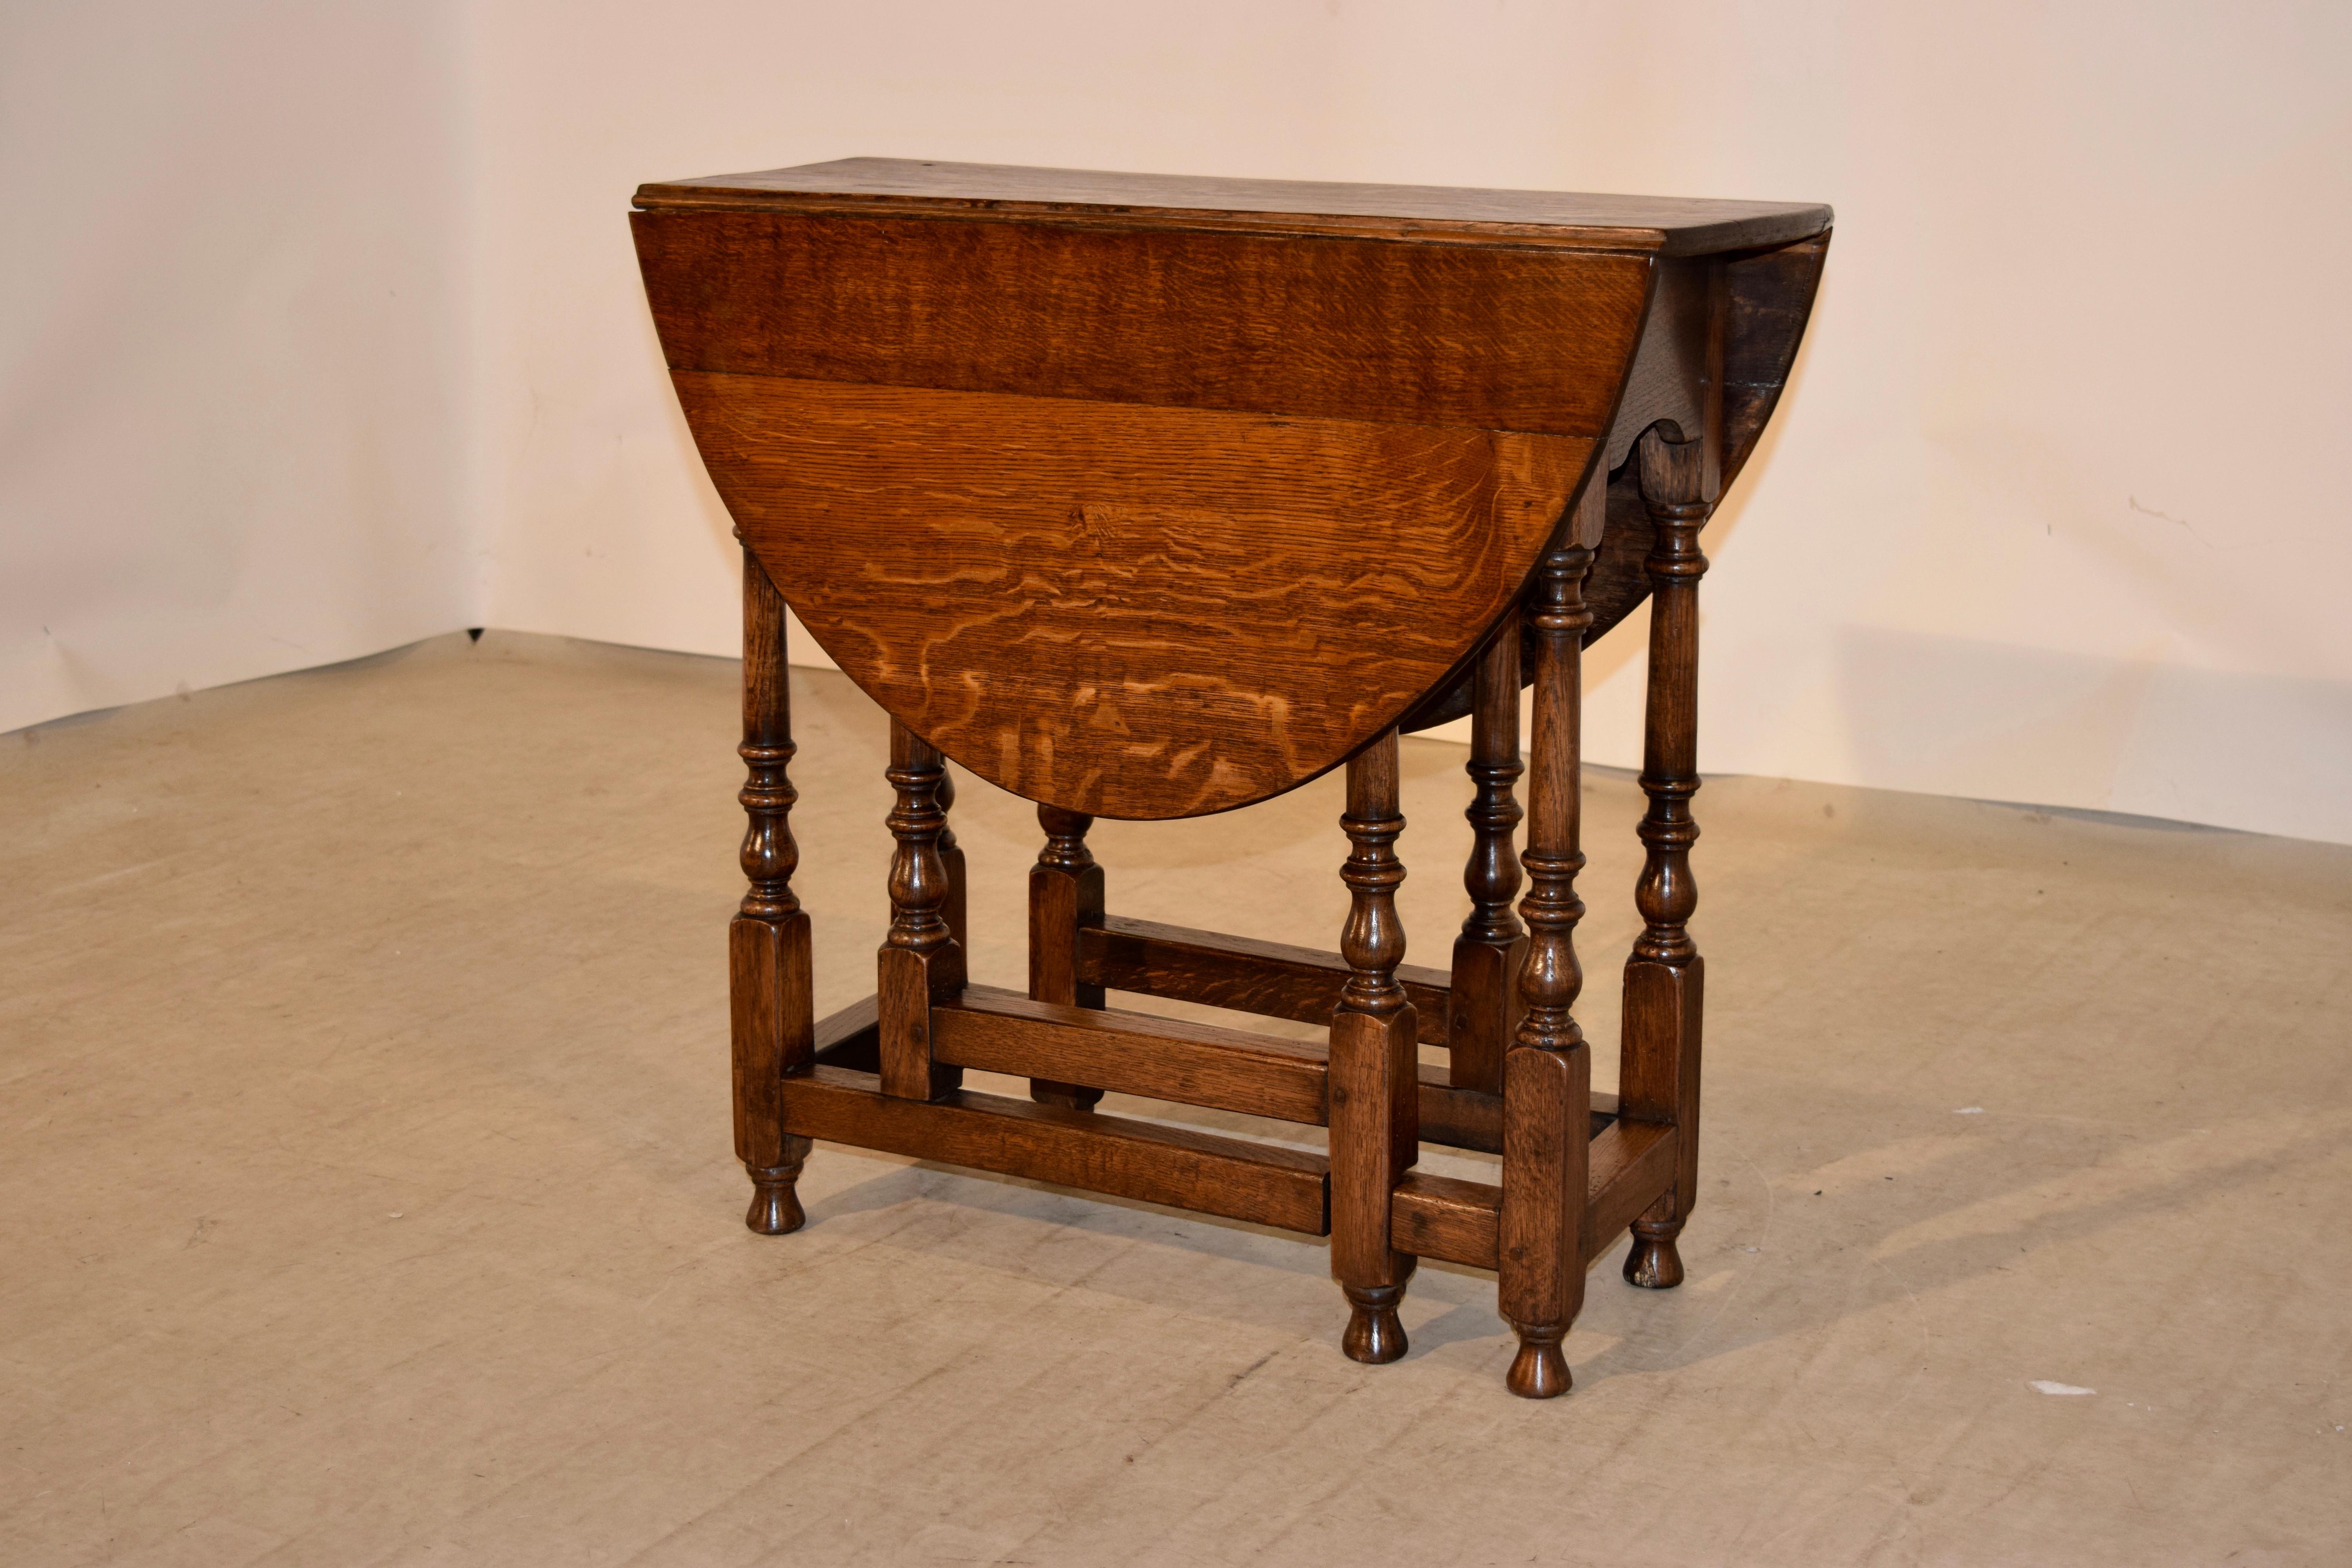 Late 18th century English oak gateleg table with a rounded edge around the top, following down to a single drawer on the end and hand-turned legs and gates, which are joined by stretchers and raised on hand-turned feet. Lovely hand pegged